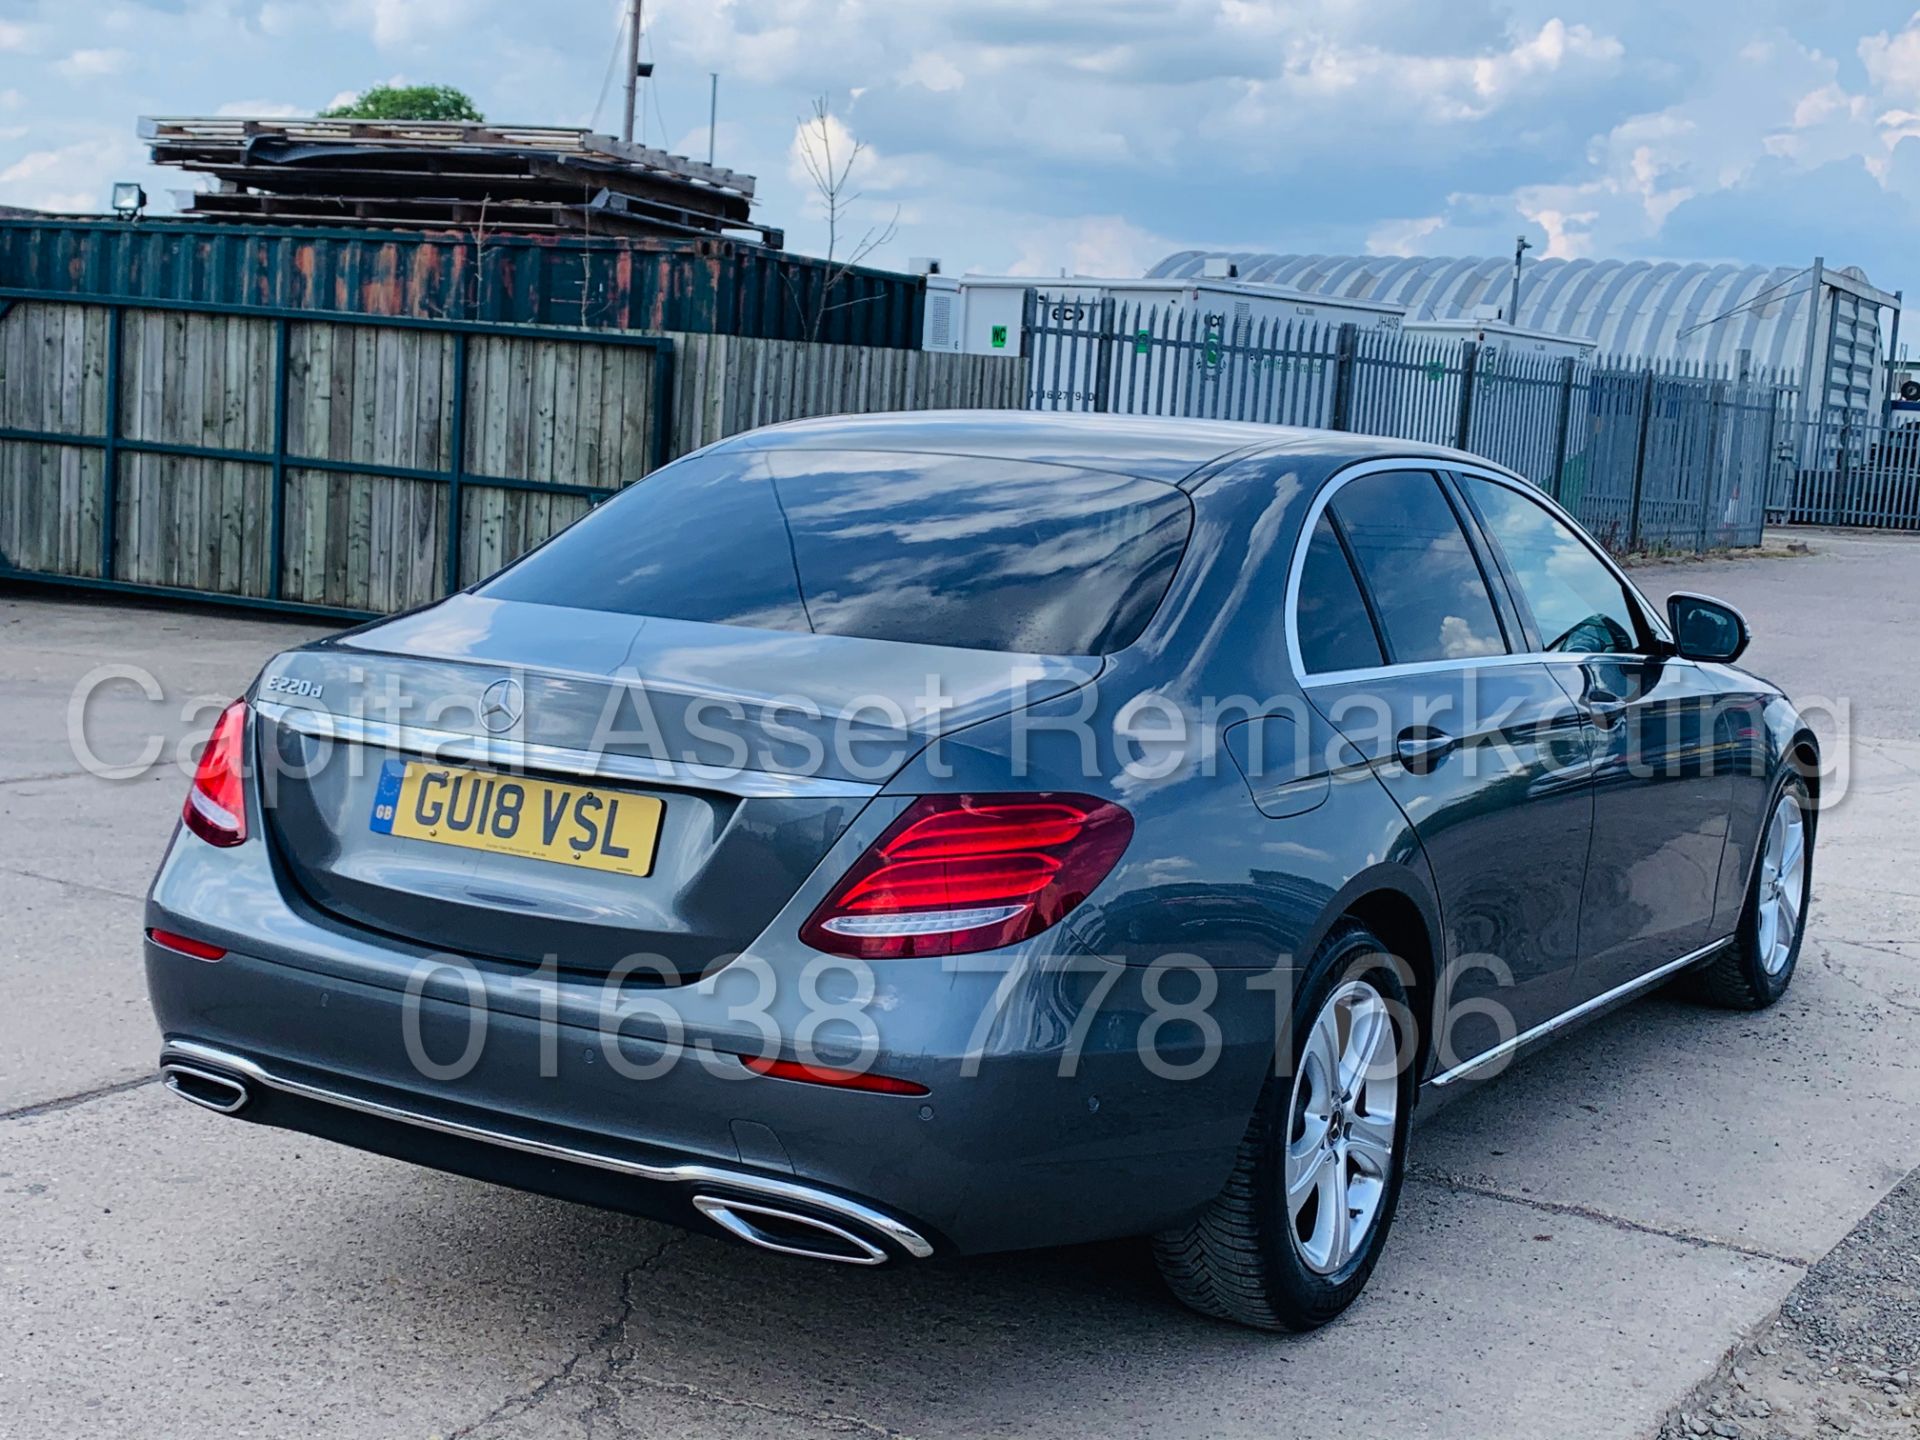 (On Sale) MERCEDES-BENZ E220d *SALOON* (2018 - NEW MODEL) '9G TRONIC AUTO - LEATHER - SAT NAV' - Image 11 of 50